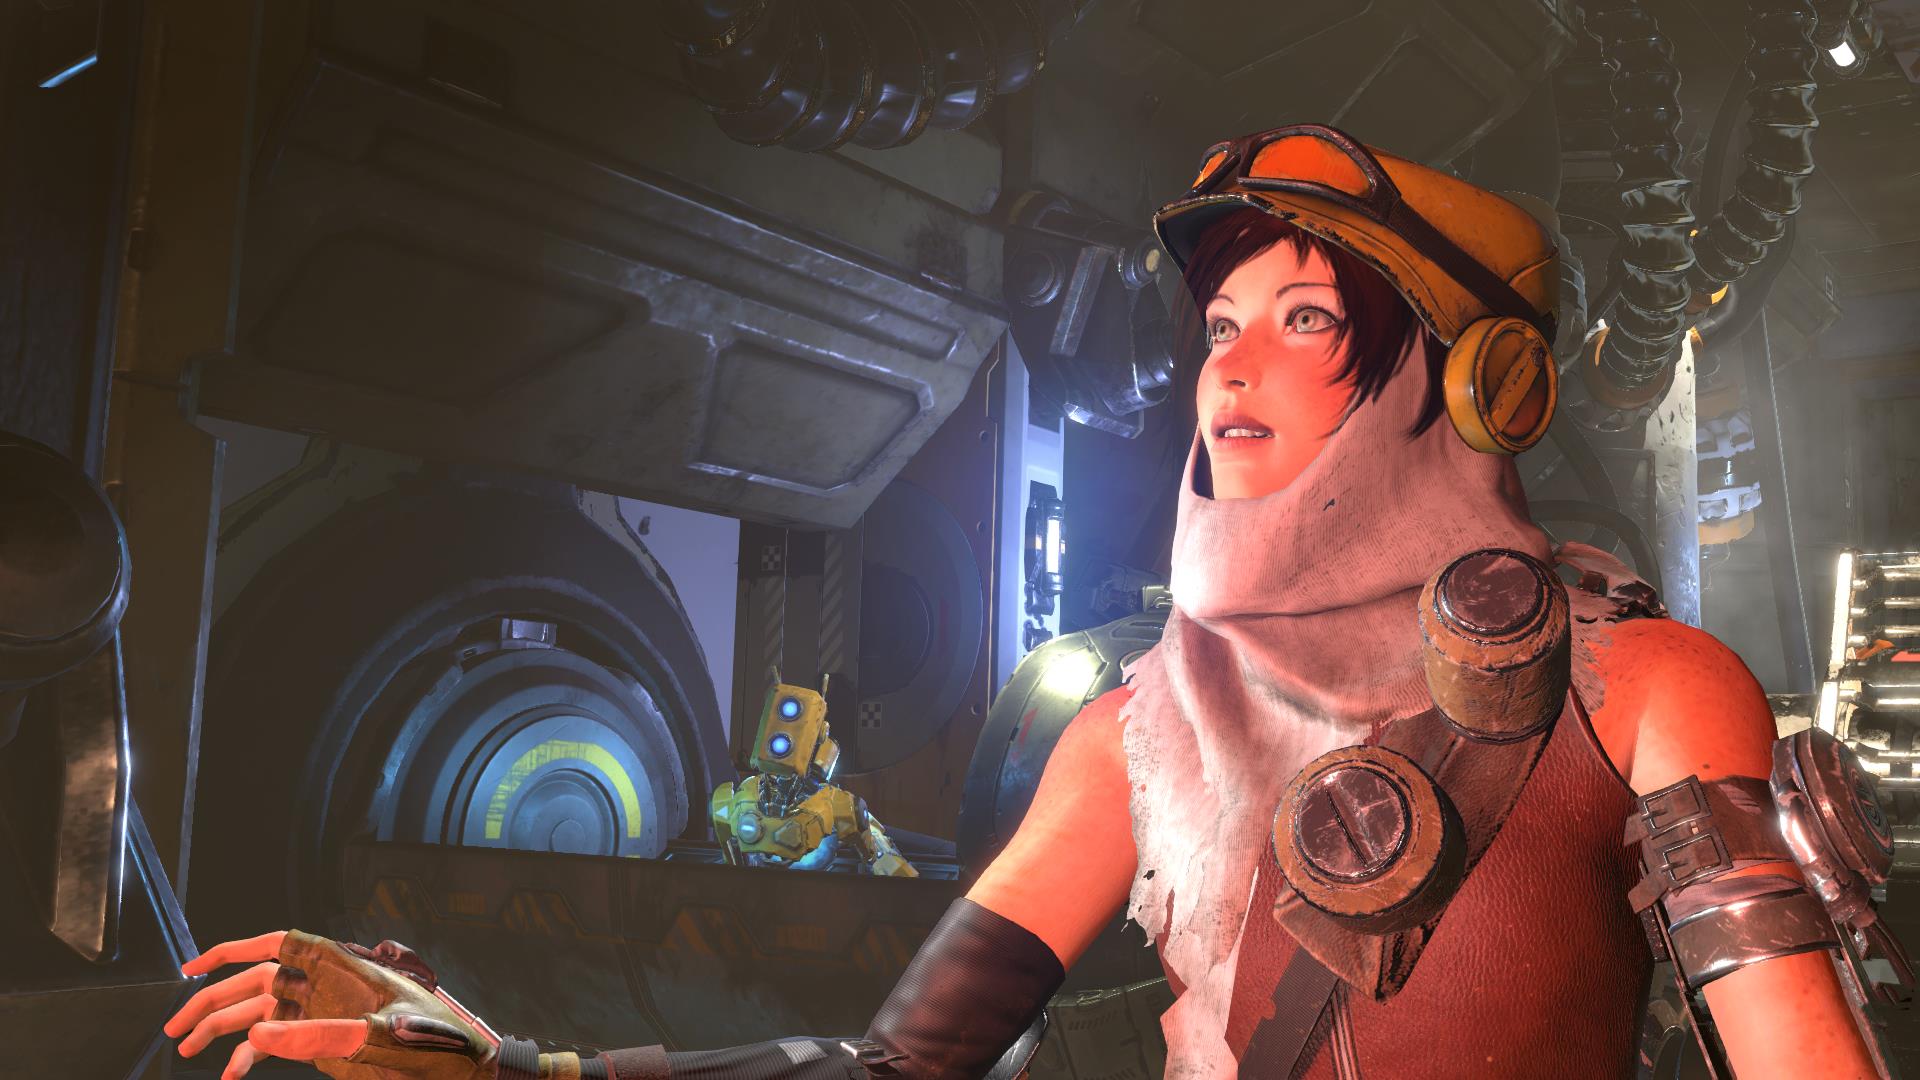 Image for New ReCore gameplay footage makes game look a bit mundane